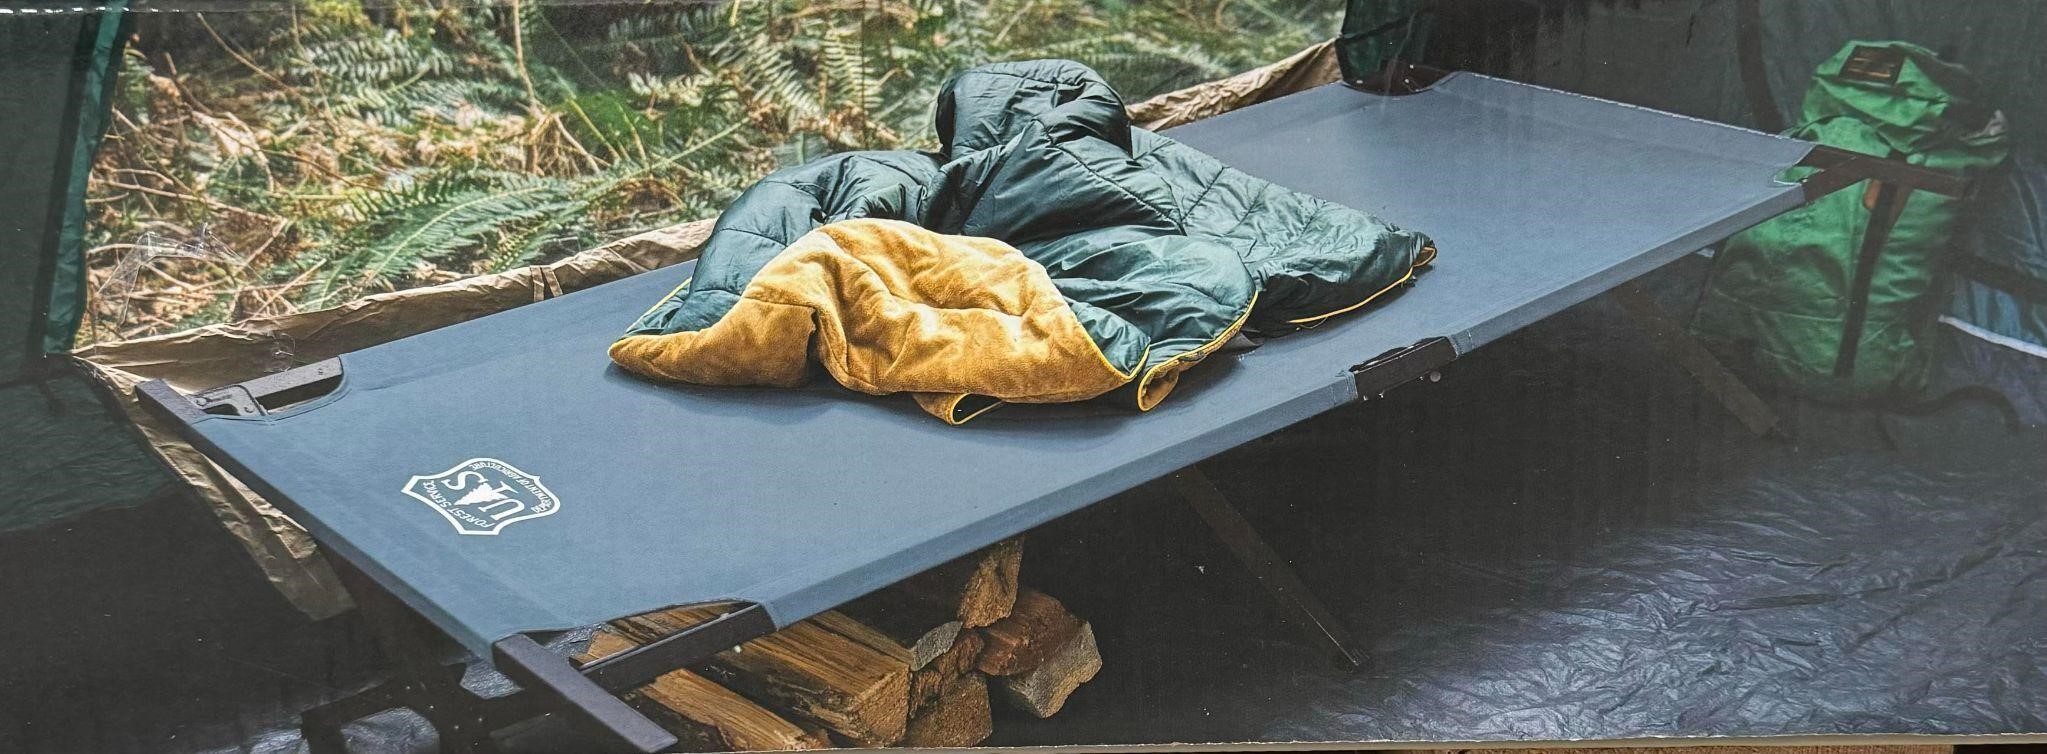 USDA Forest Service Camping Cot